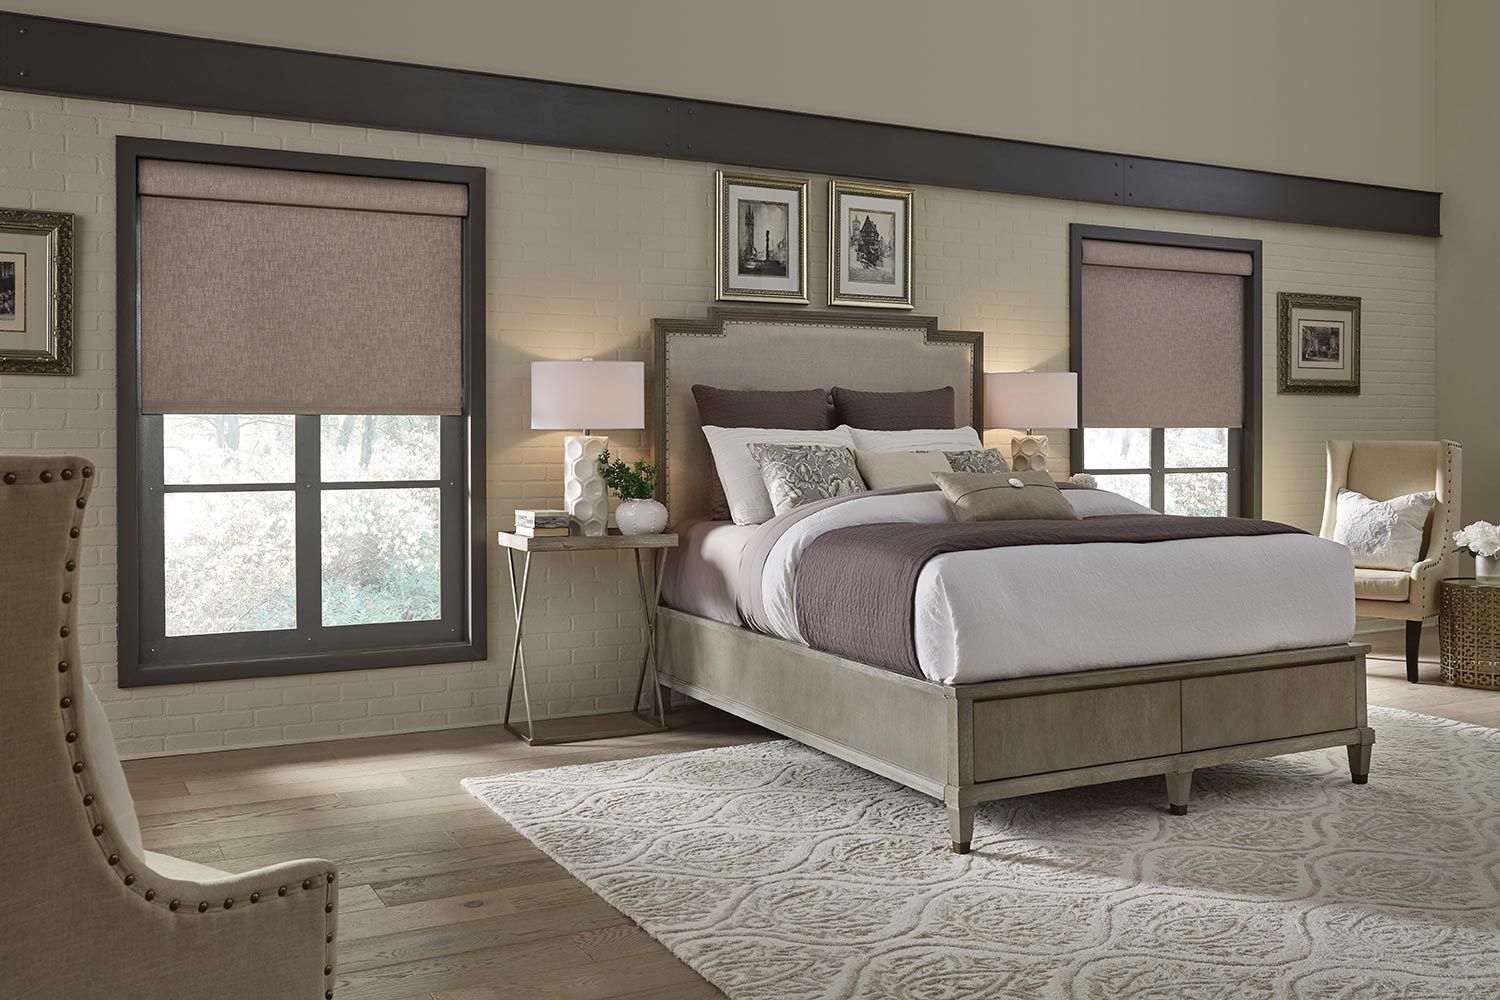 Lutron Shades in a bedroom